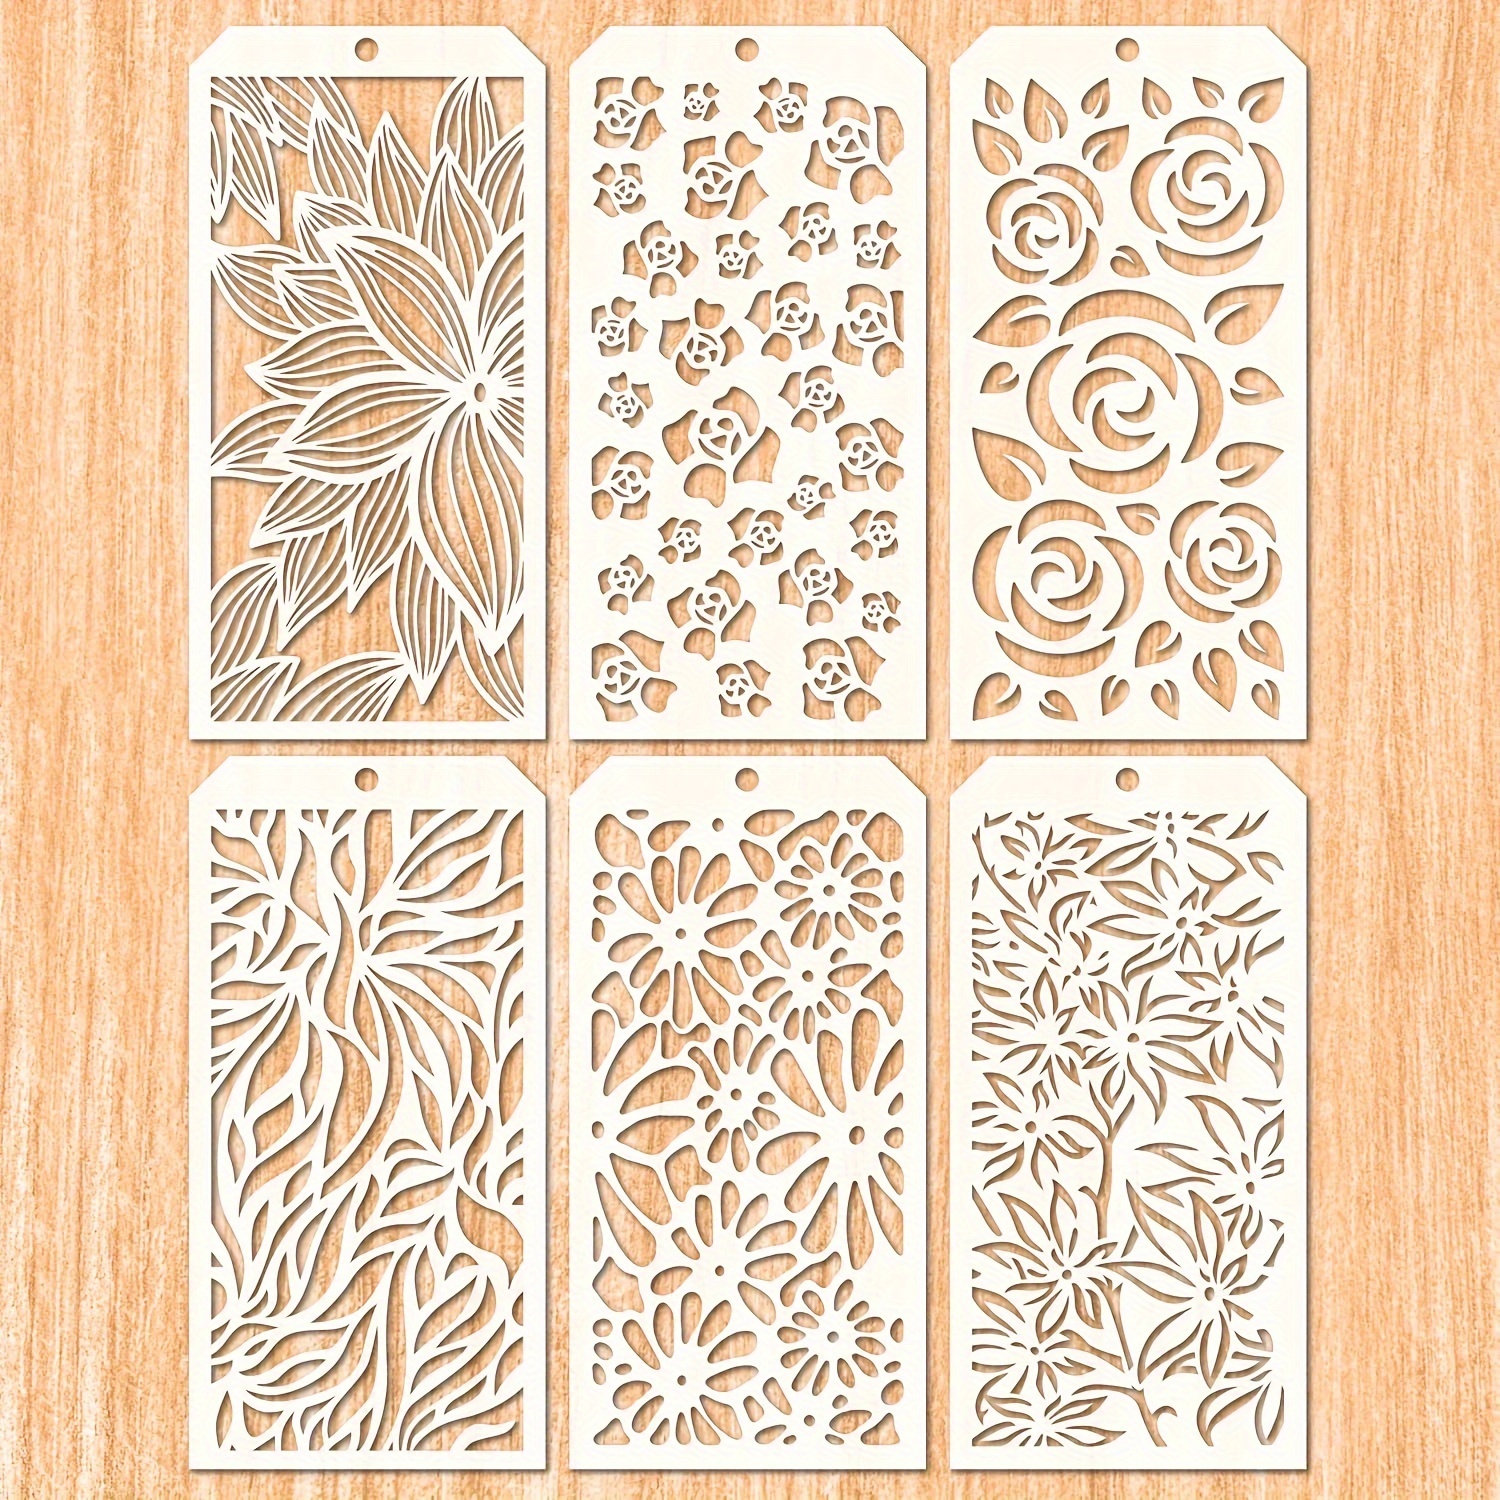 

6pcs Diy Flower Decorative Stencil Template For Scrapbooking Painting On Wall Furniture Crafts Suitable Fo Scrapbooking Cake Cookie Tile Furniture Wall Floor Decor Drawing Tracing Diy Art